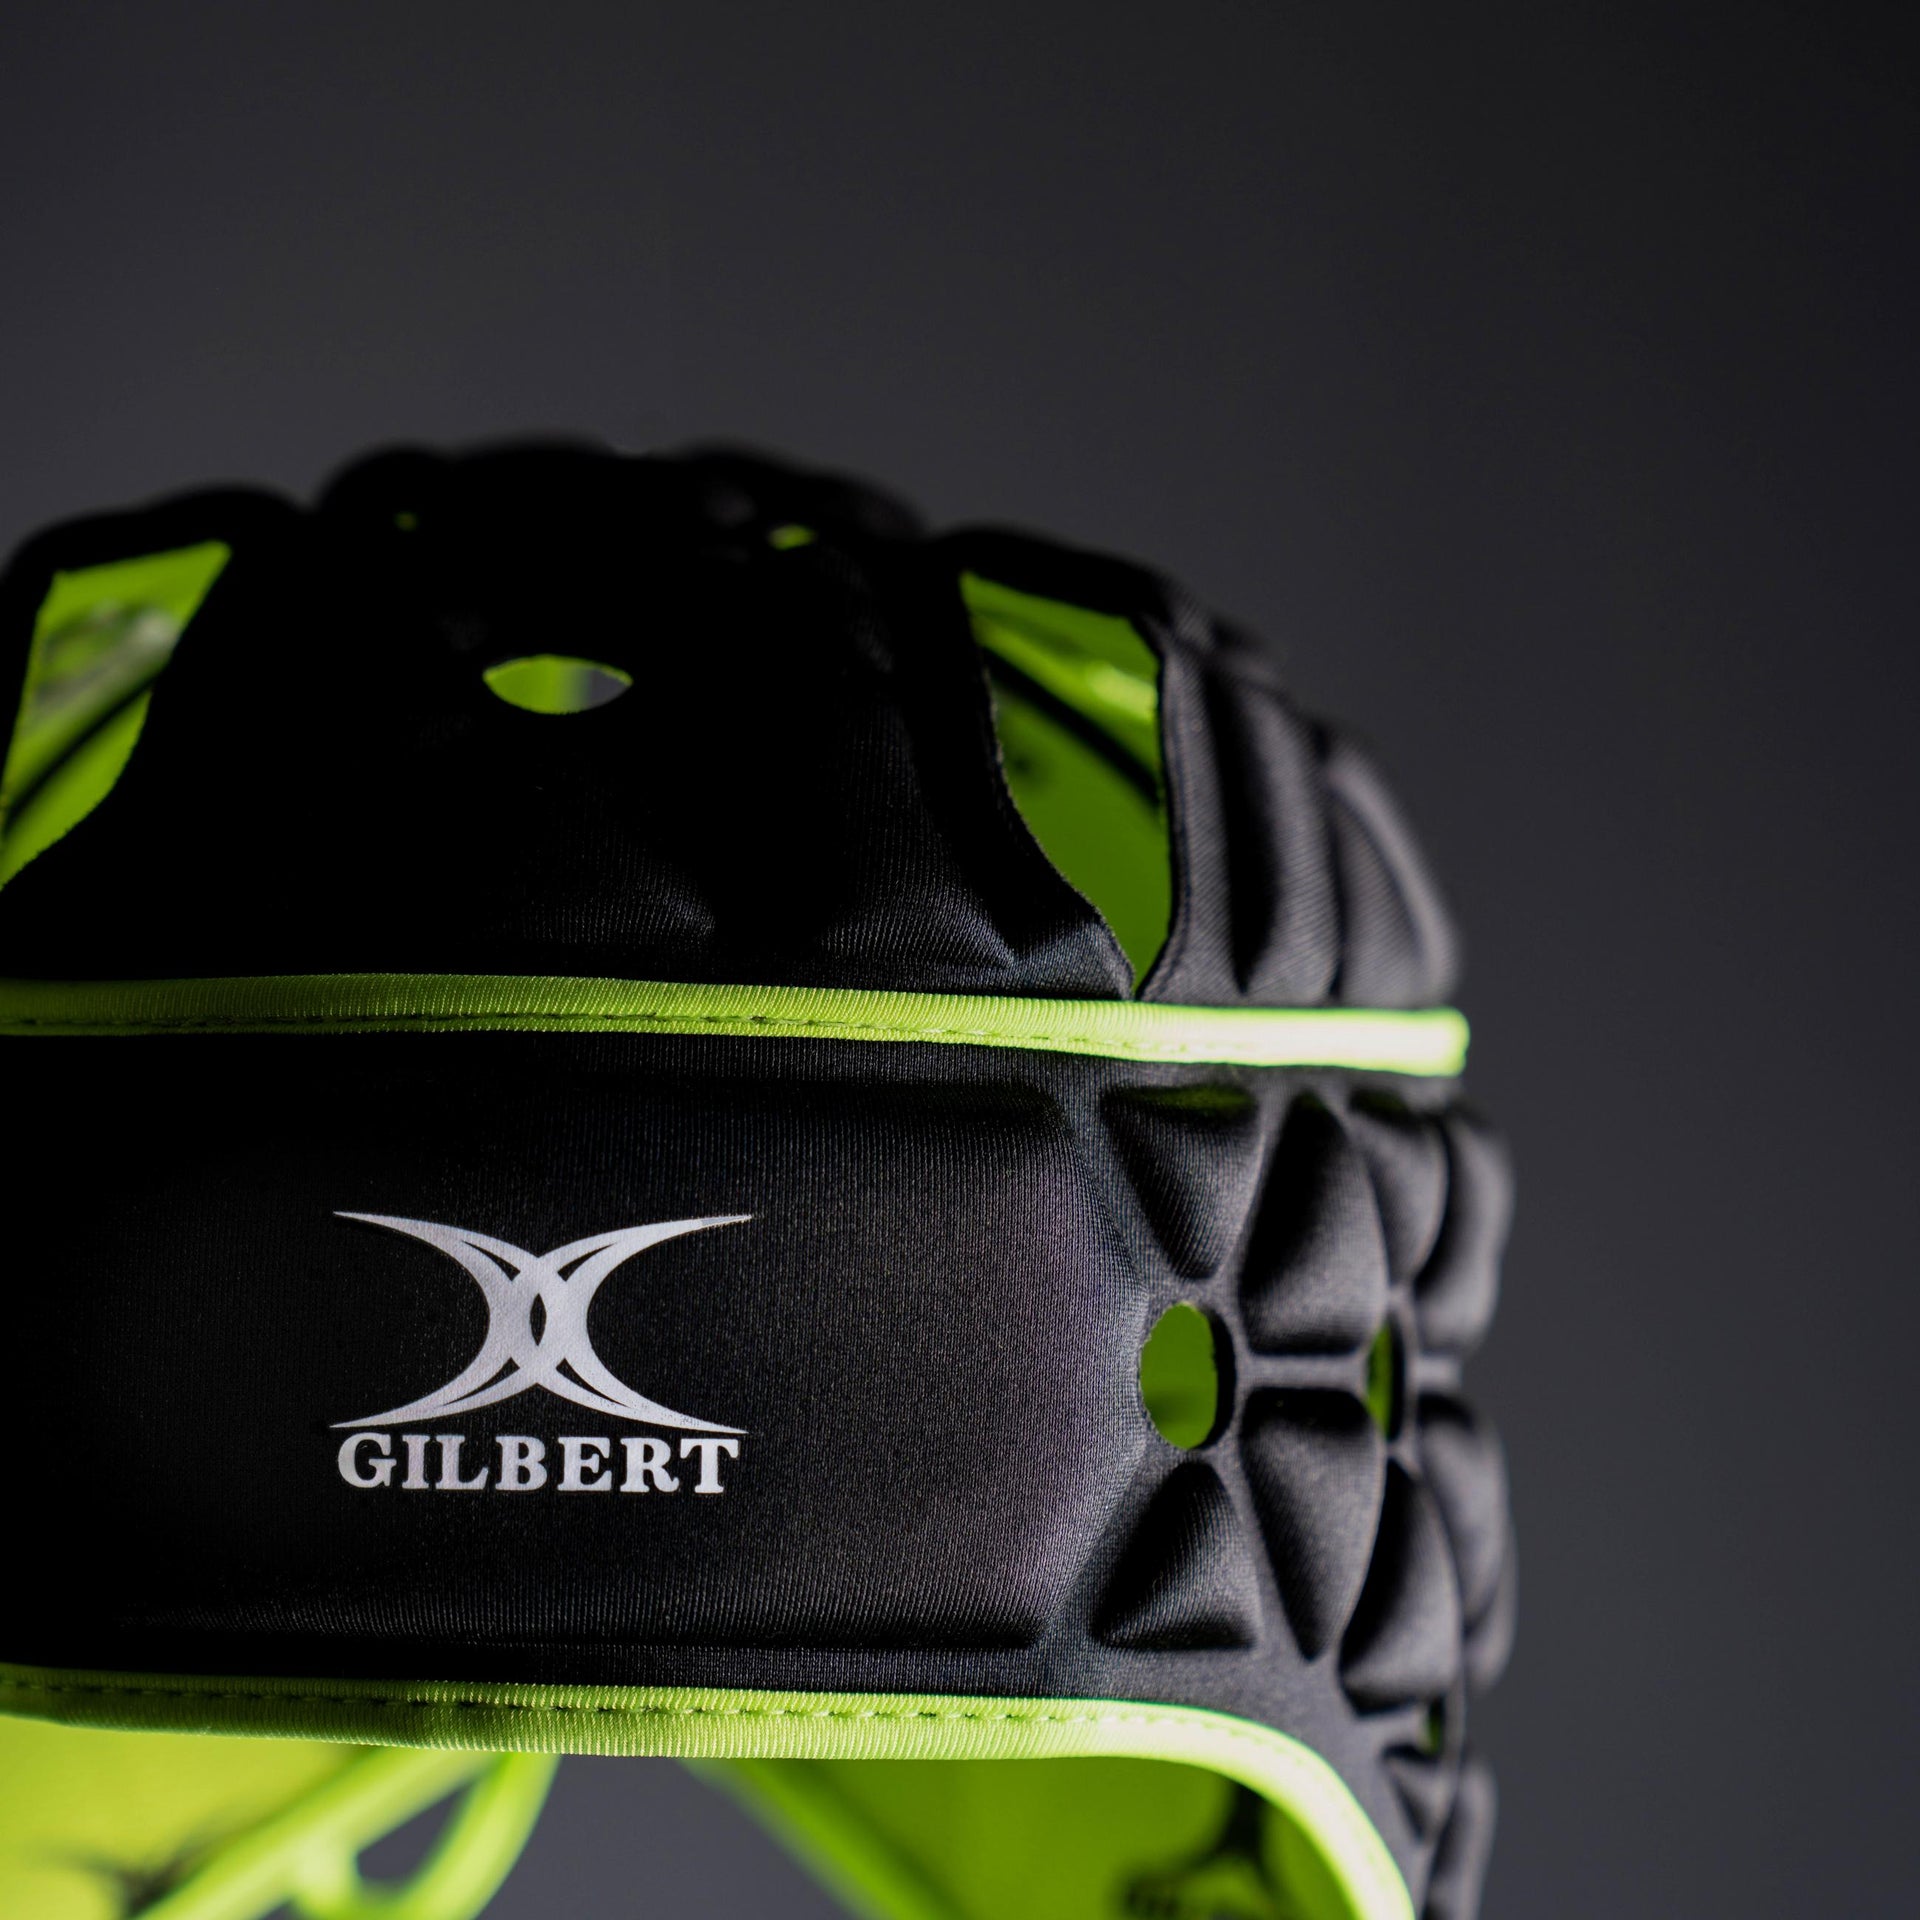 CASCO PARA RUGBY IGNITE - Gilbert Rugby Colombia